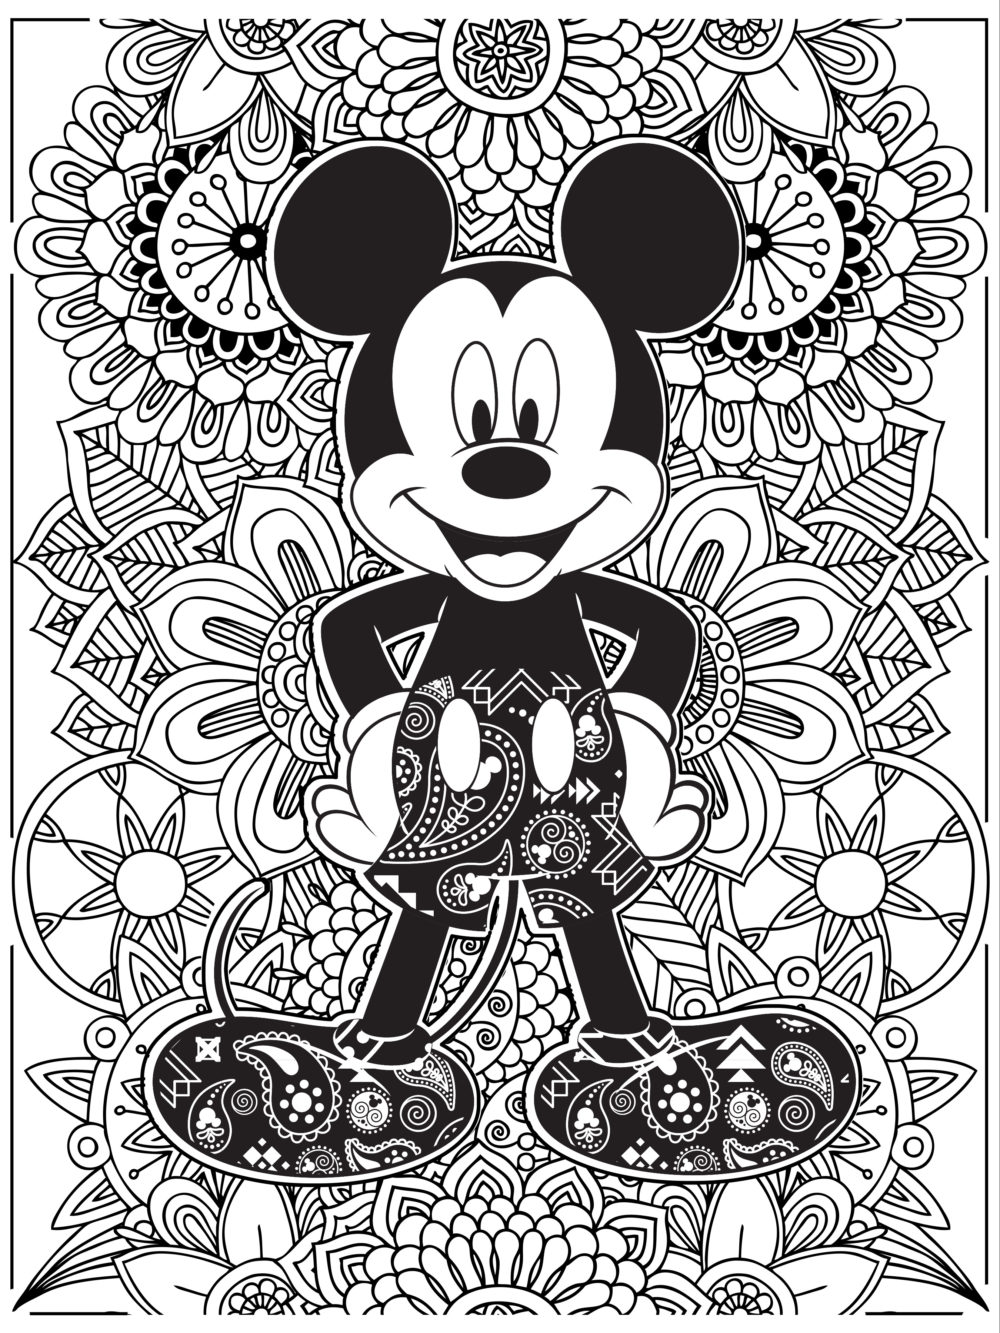 Download The Philosopher's Wife: Free Printable Disney Coloring Pages